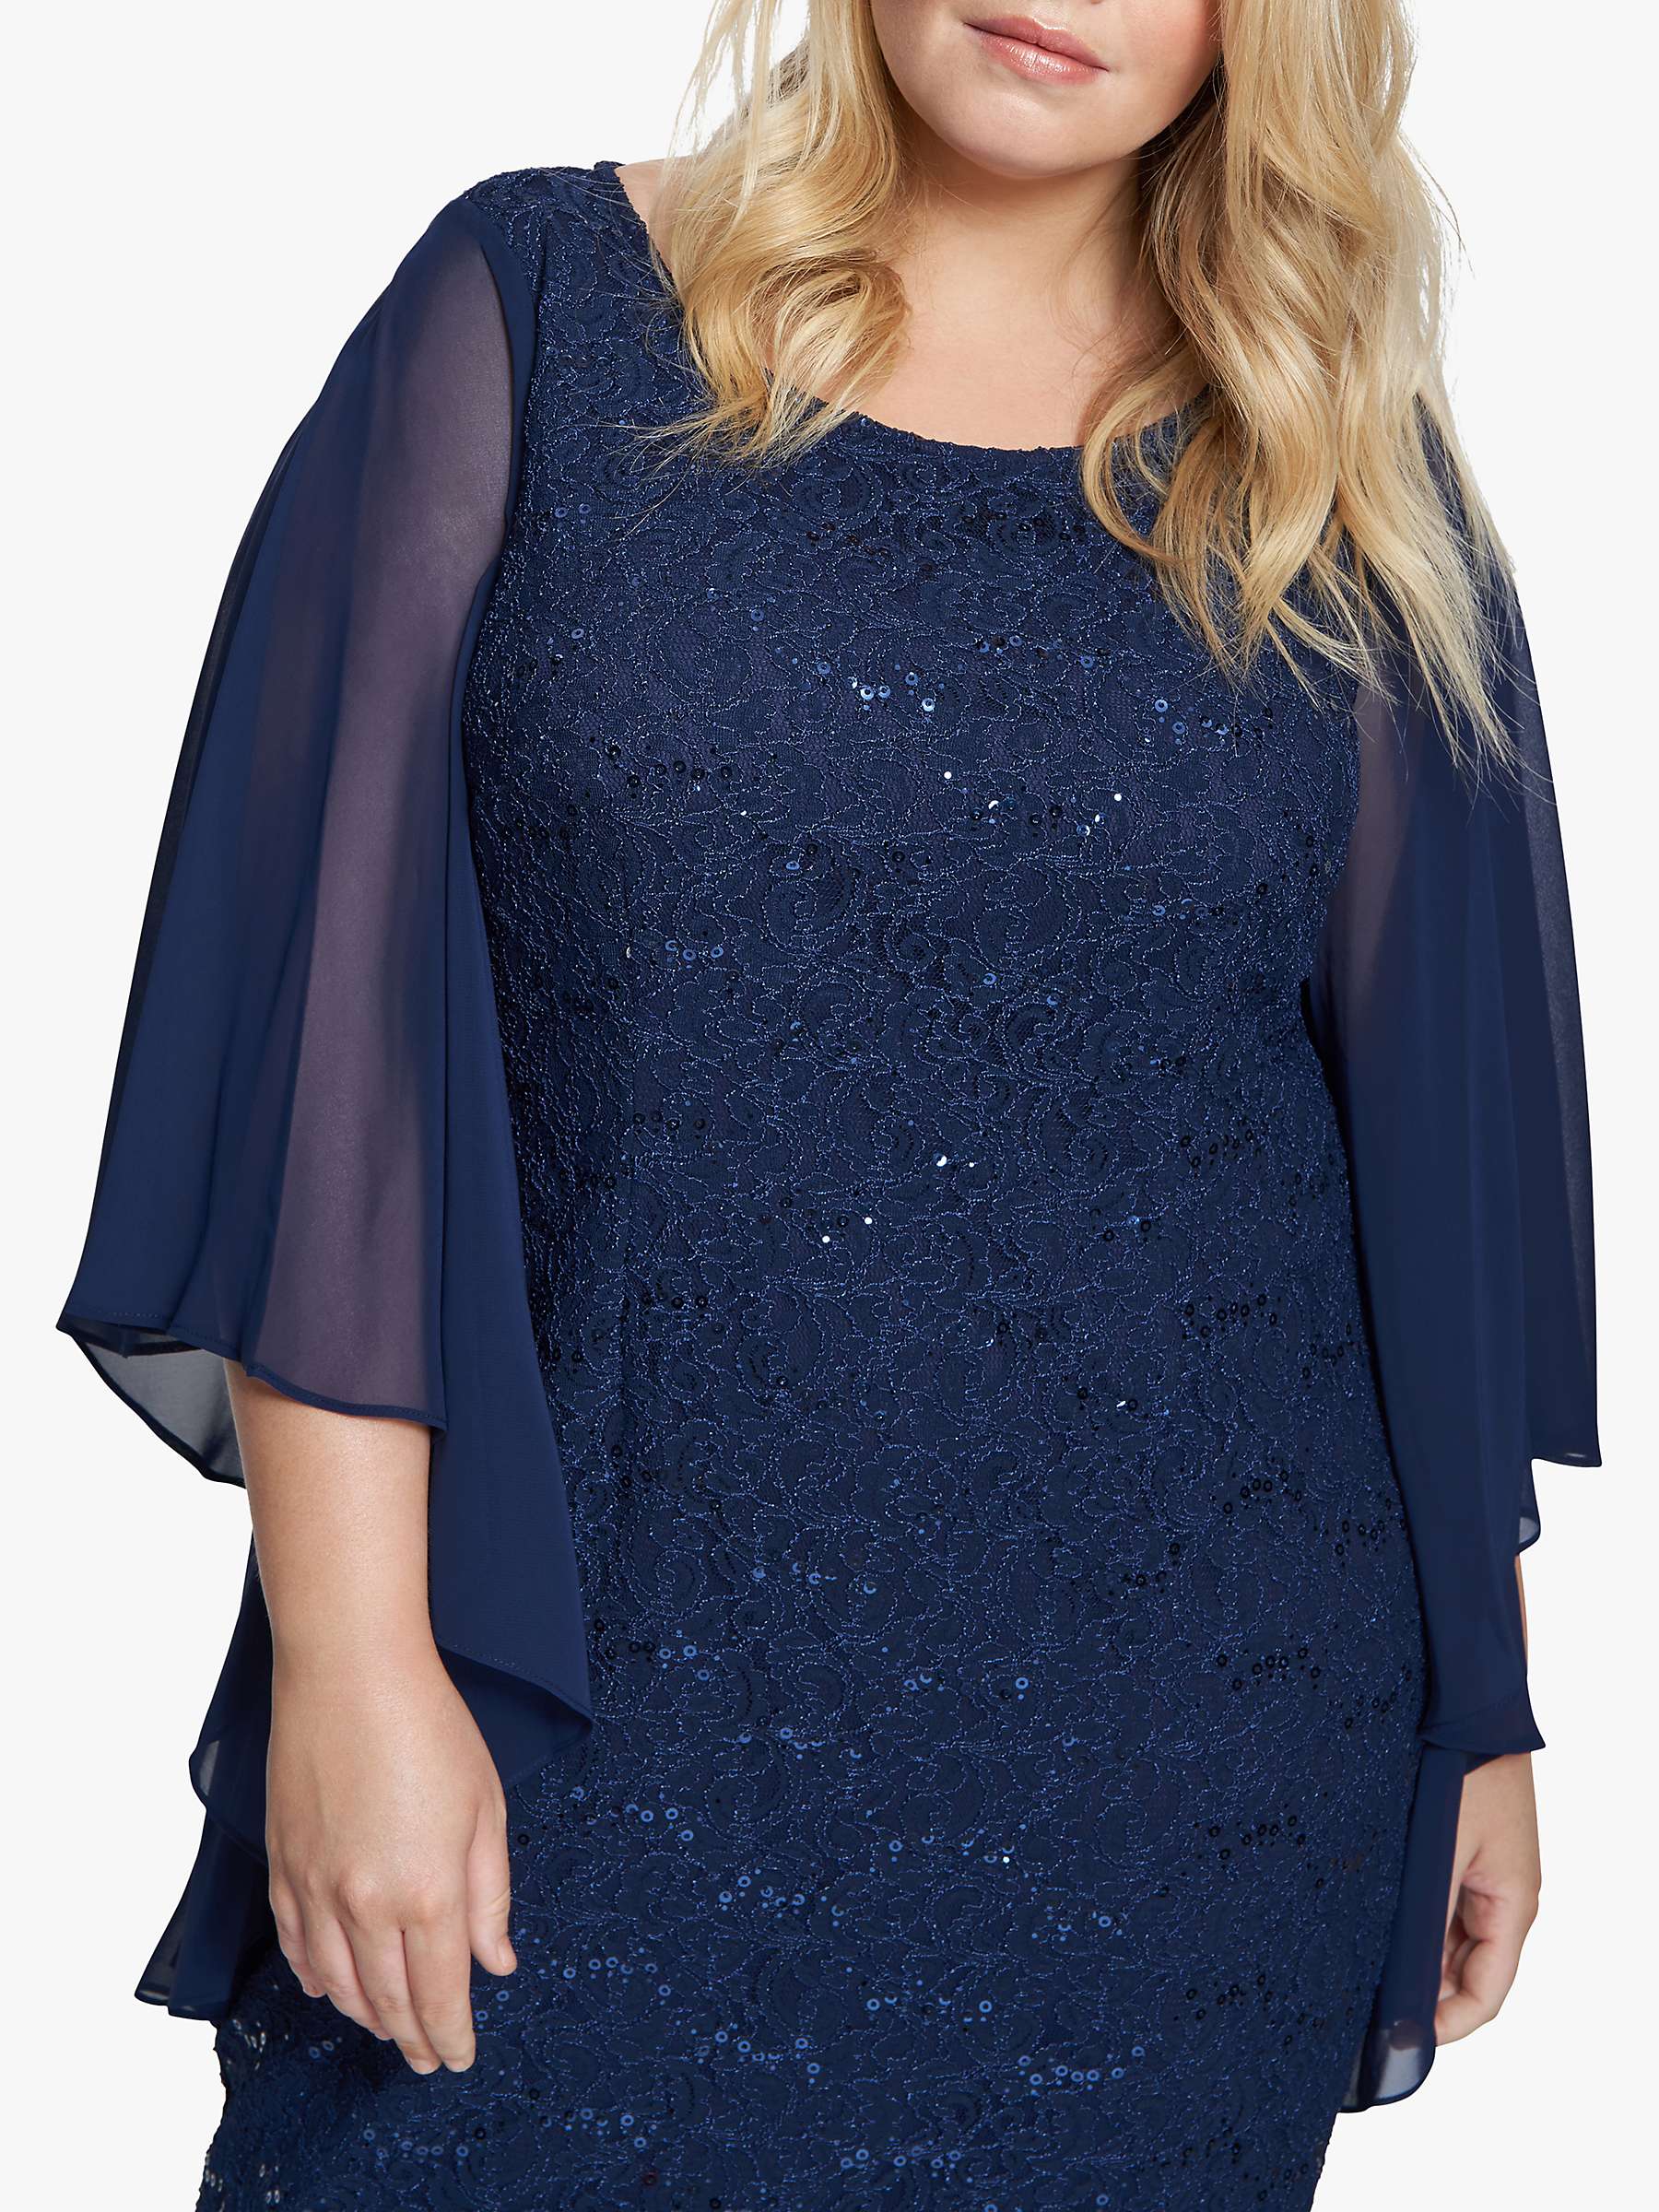 Buy Gina Bacconi Plus Size Passion Sequin Lace Shift Dress, Spring Navy Online at johnlewis.com